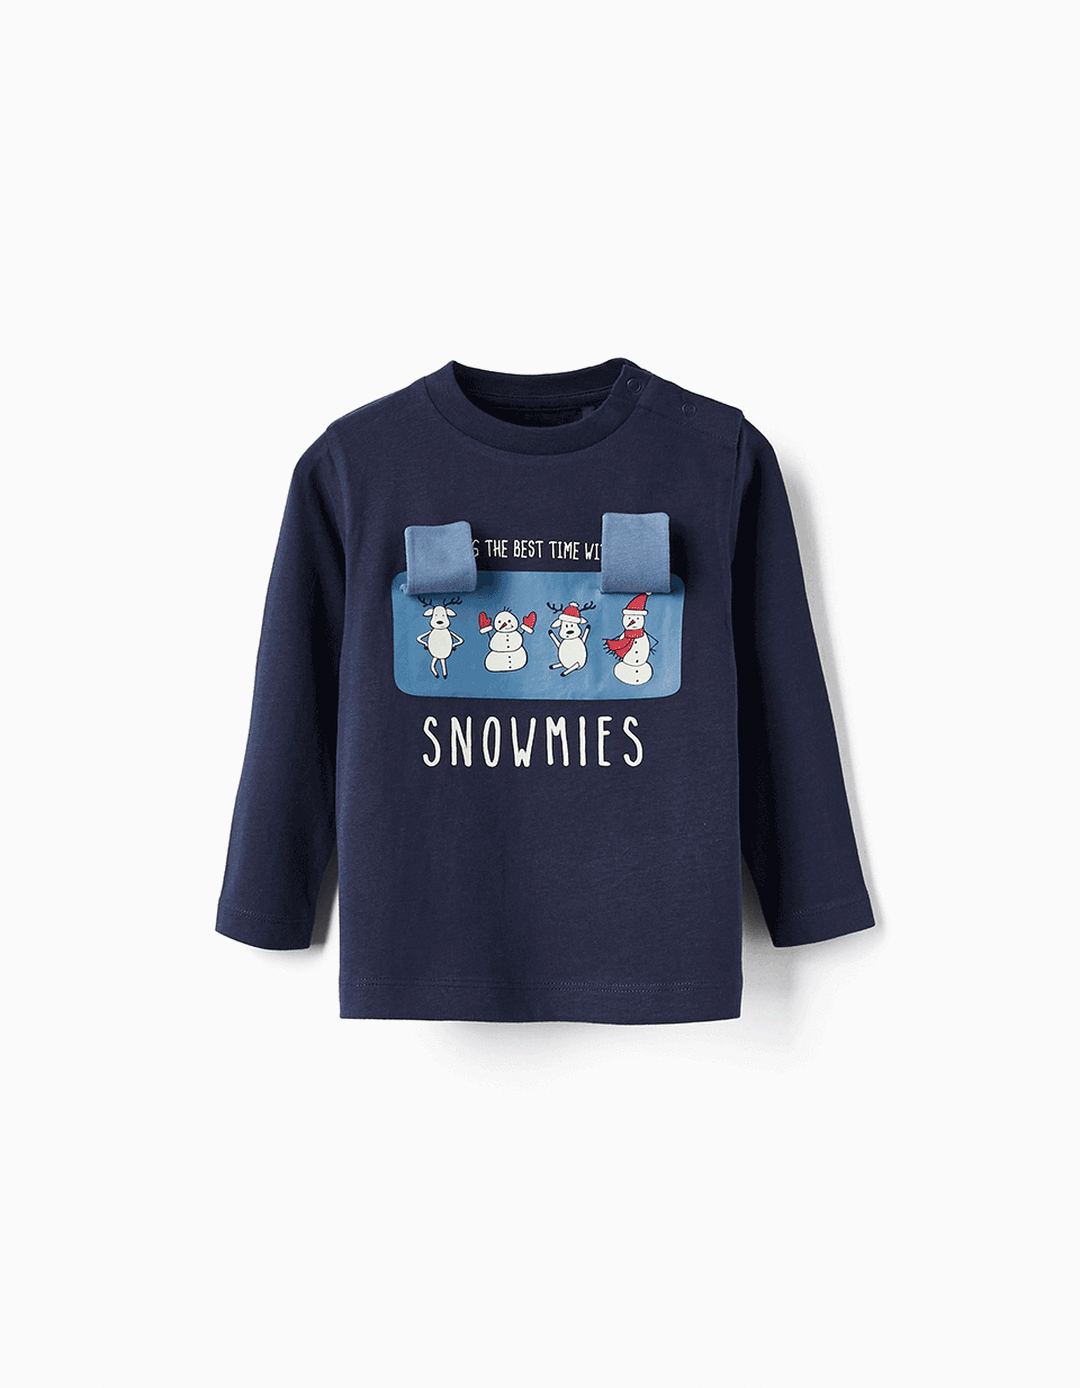 Long Sleeve Cotton T-Shirt for Baby Boys 'Snowmies', Blue